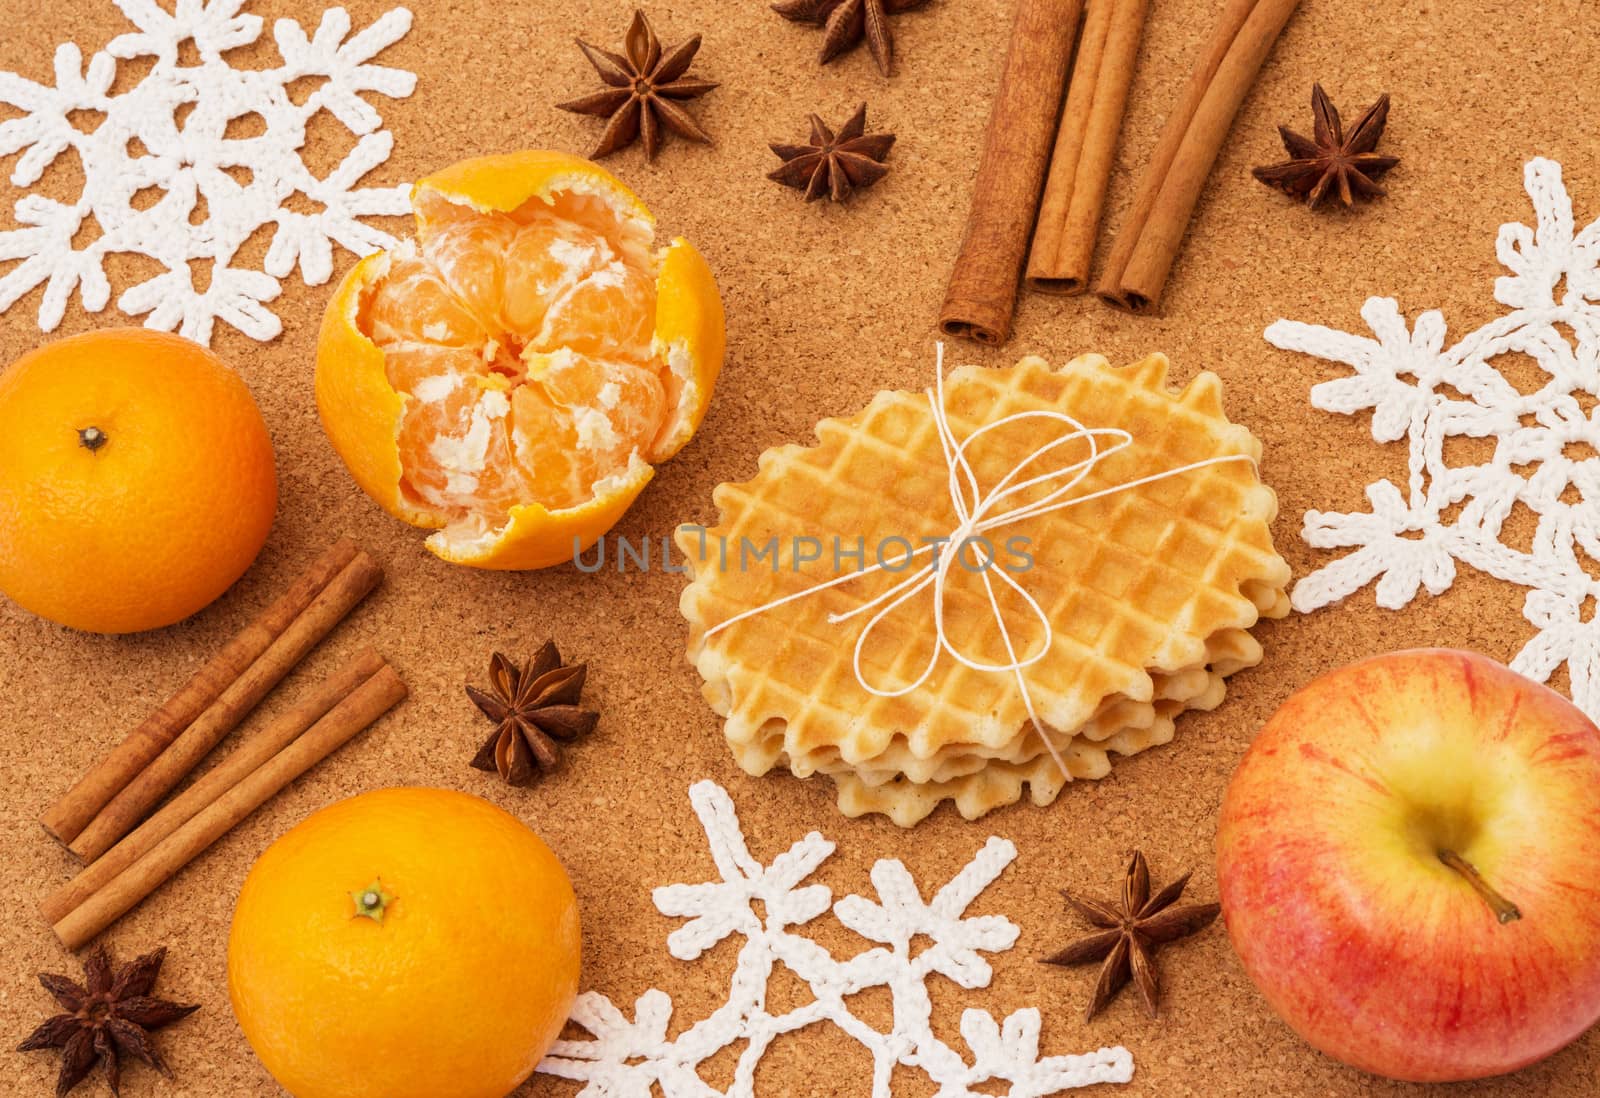 Aromatic and tasty, Christmas spices, fruits and waffles.